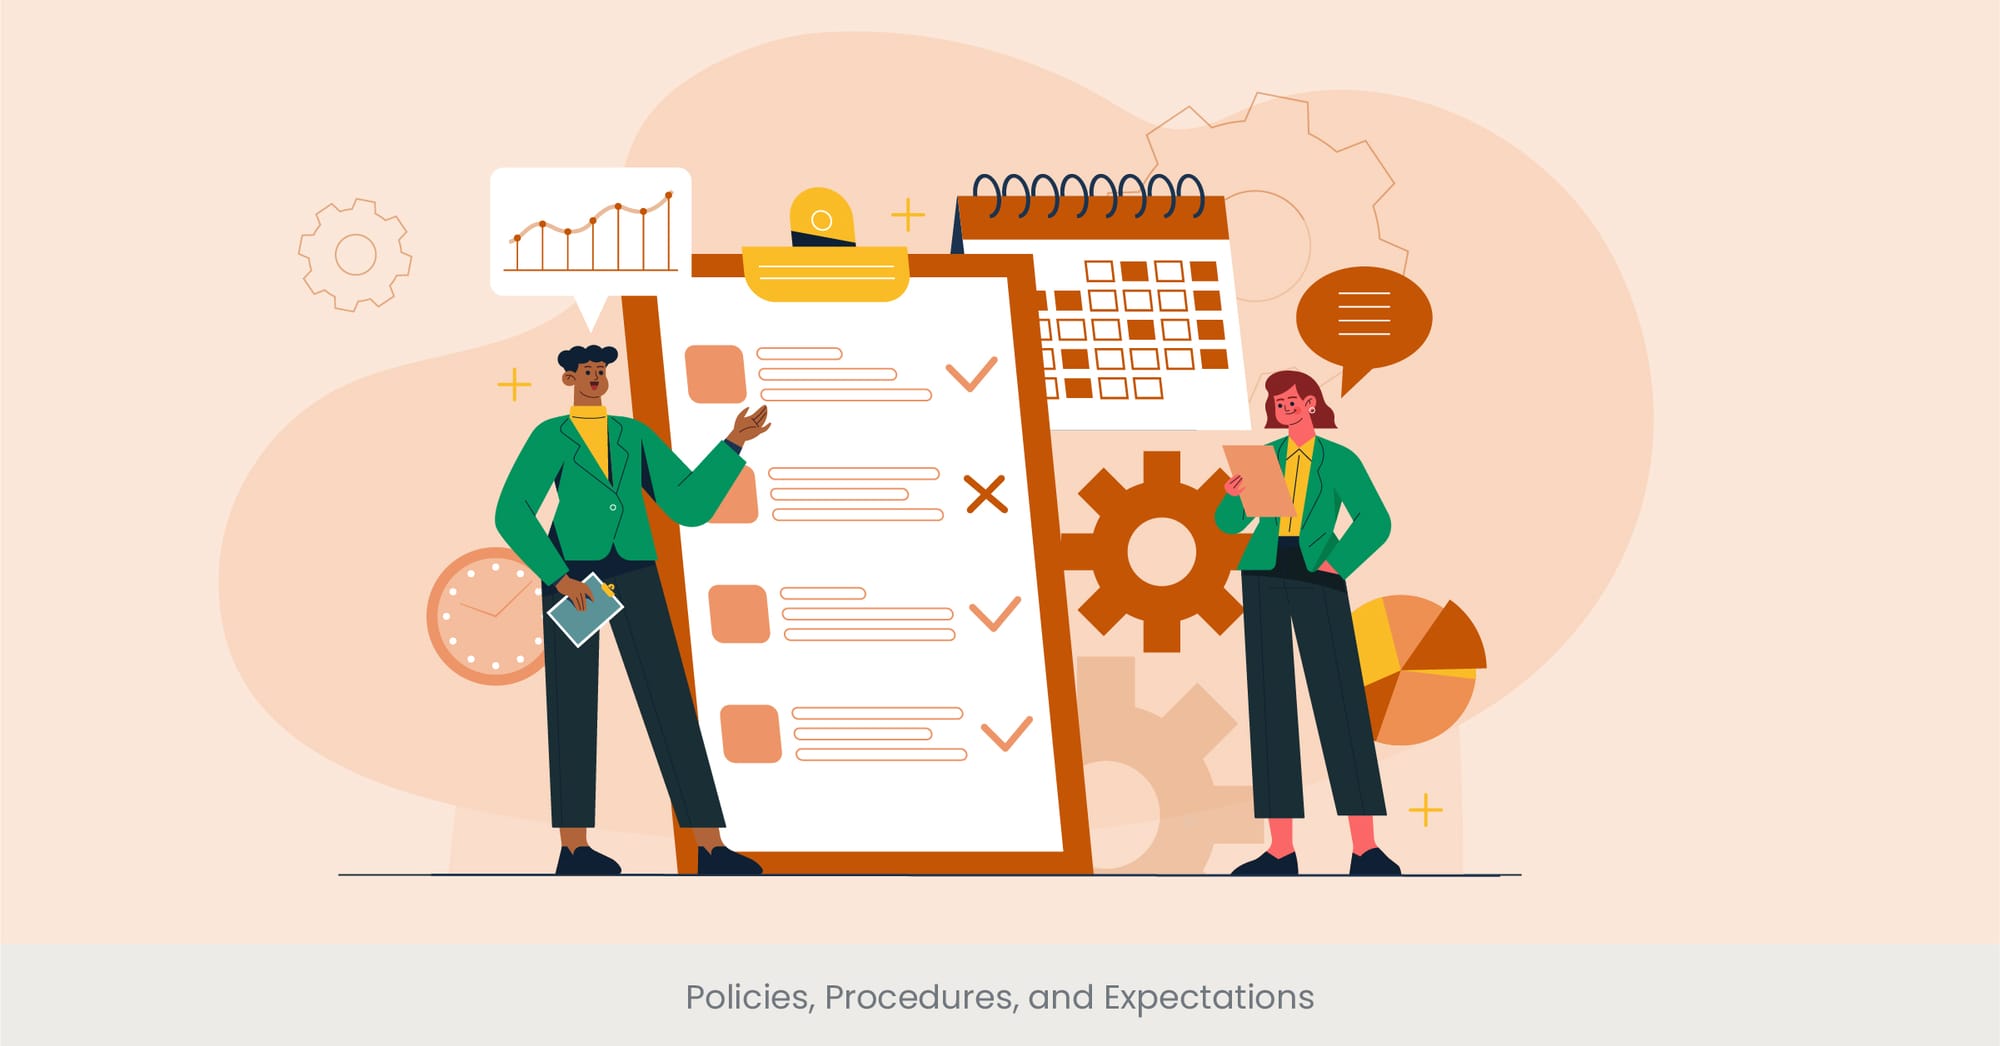 Policies, Procedures, and Expectations